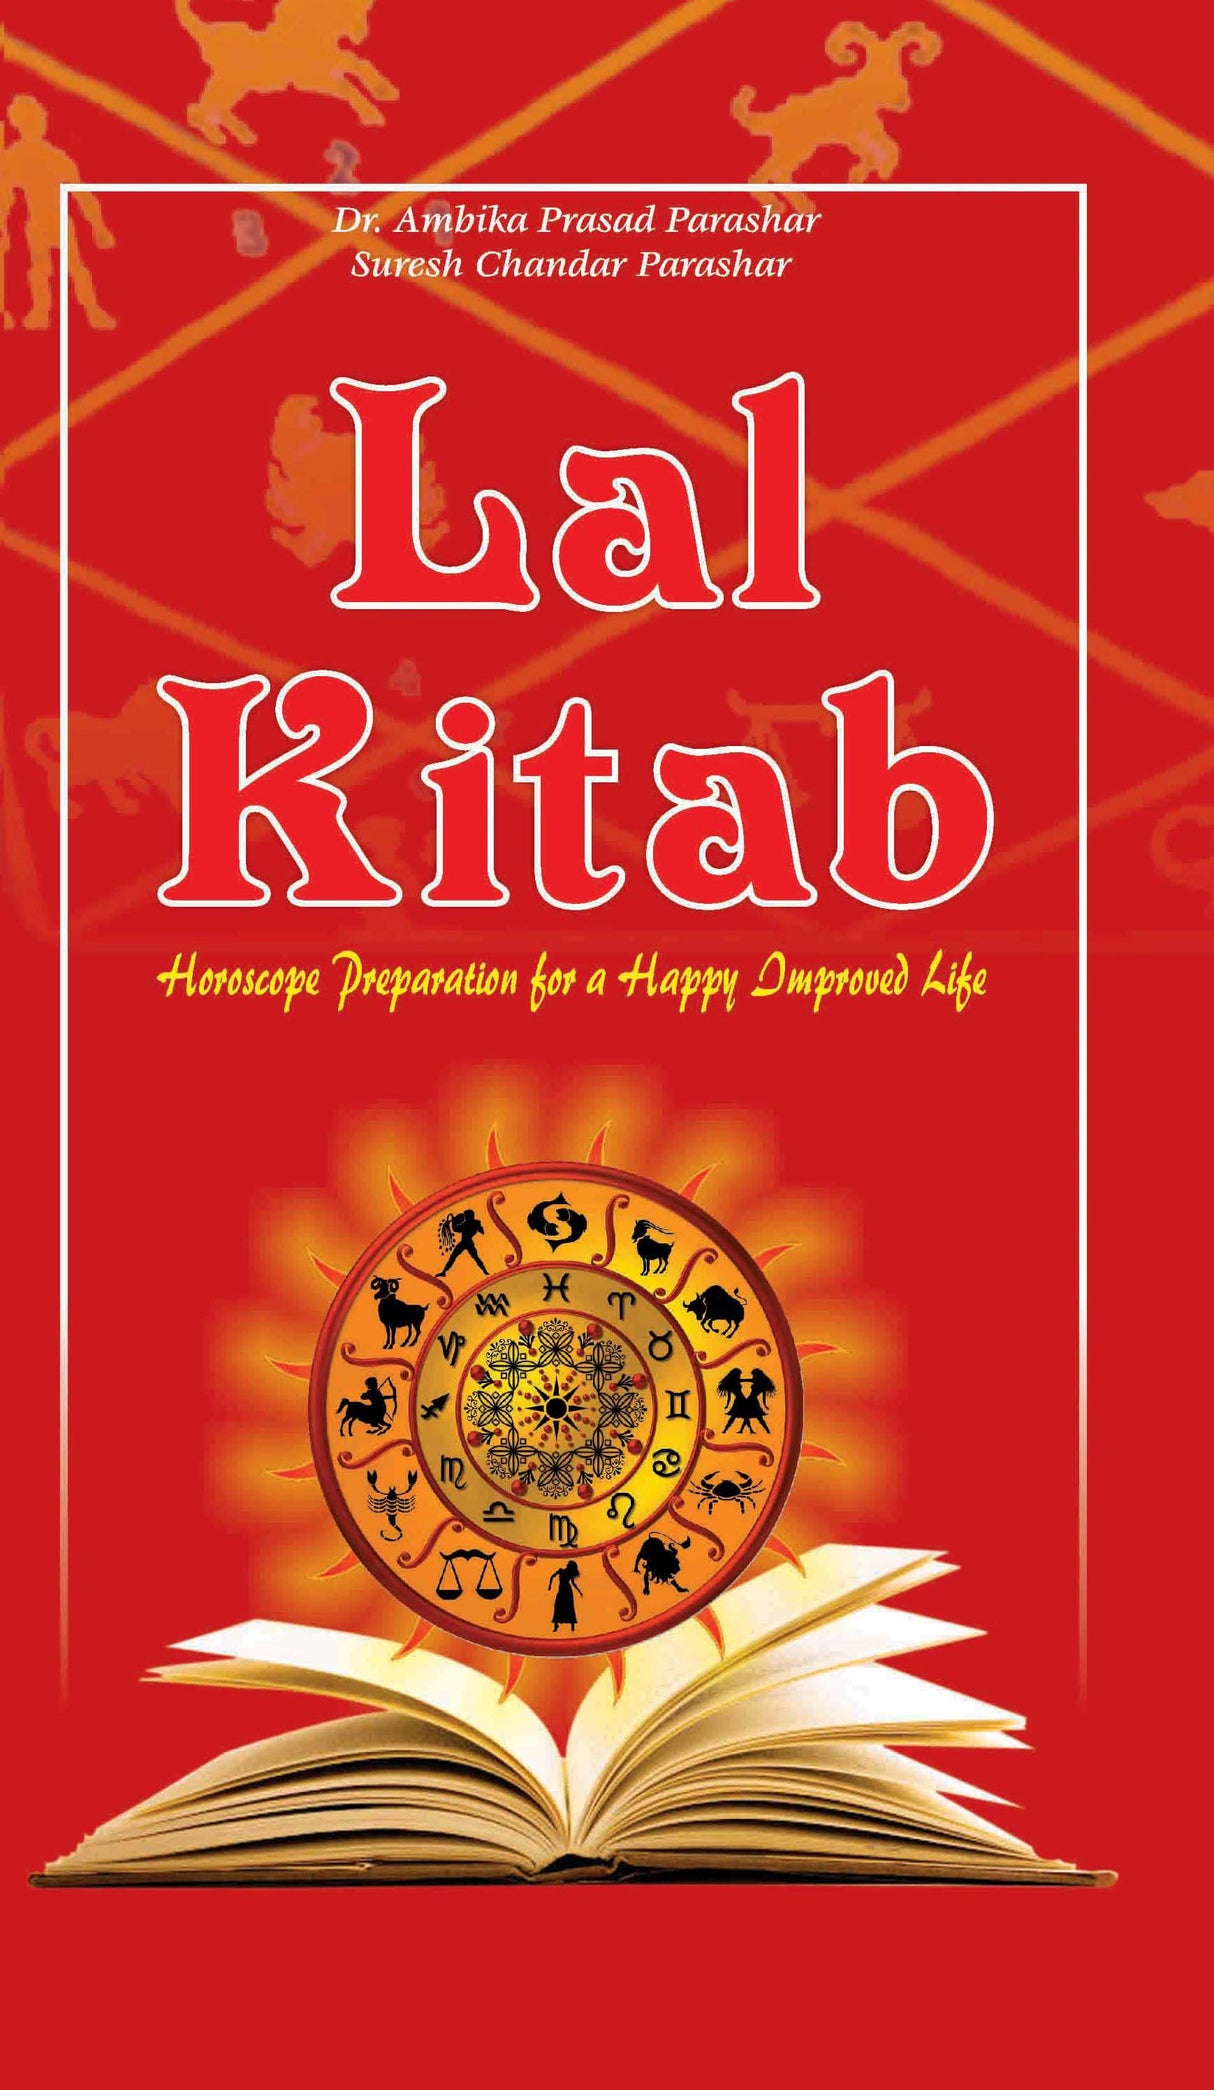 Lal Kitab: Most popular book to predict future through Astrology & Palmistry